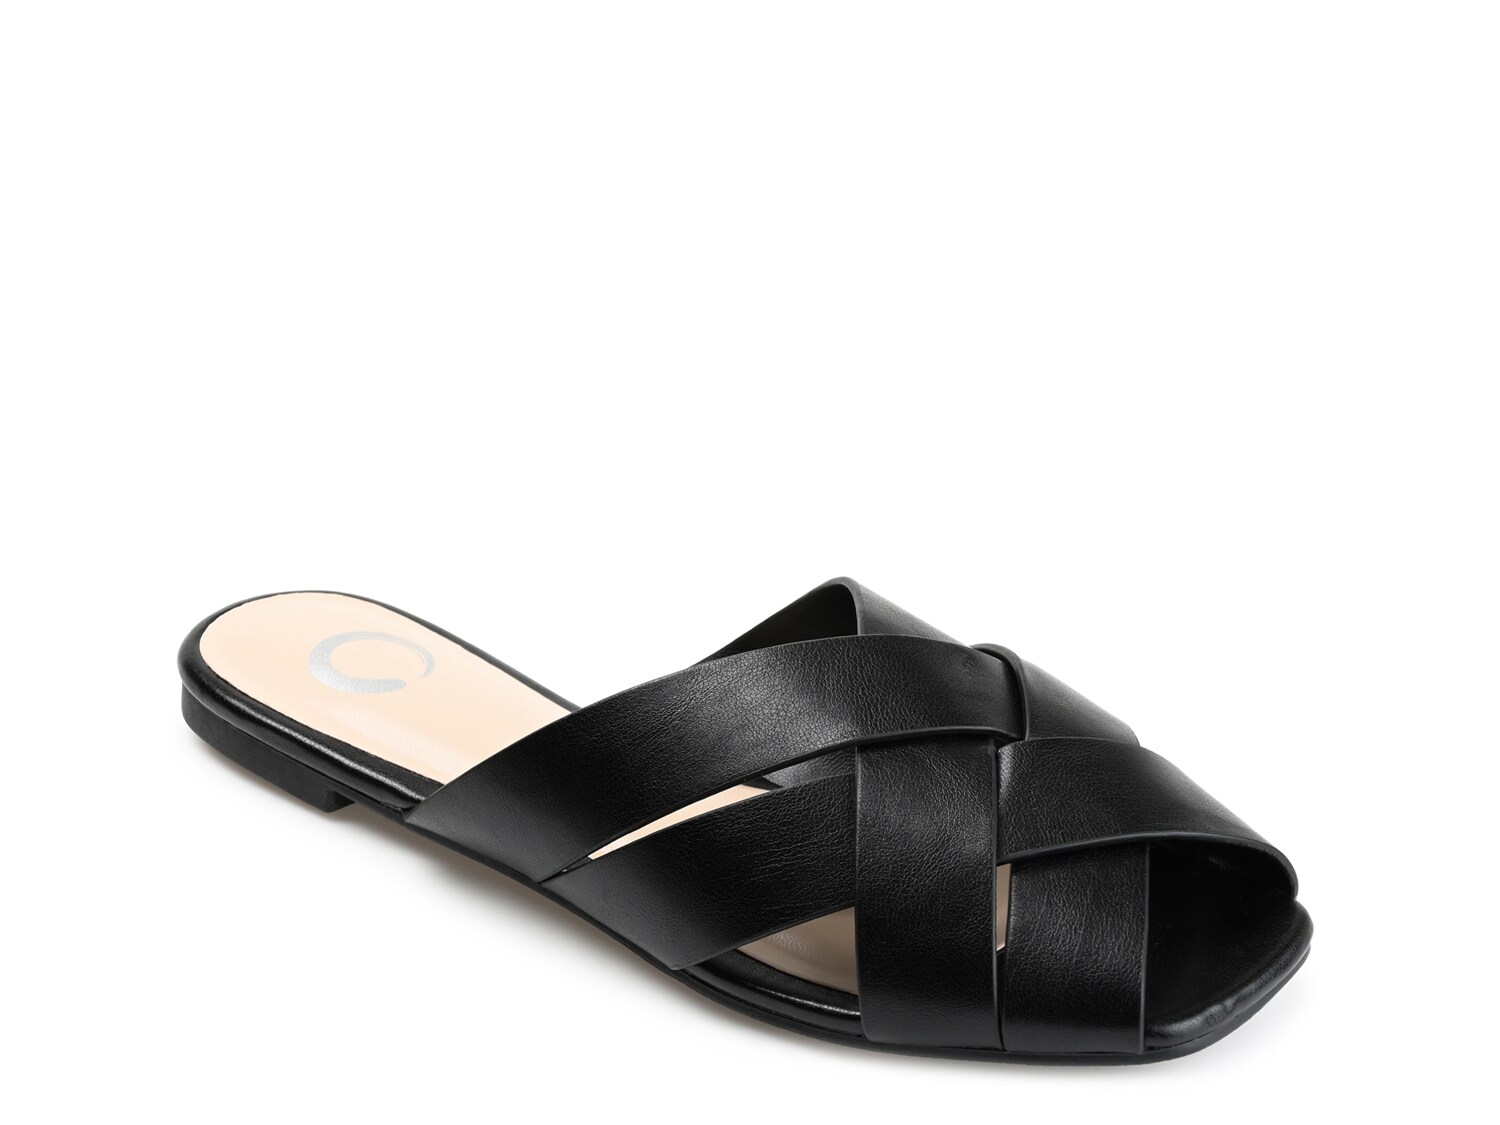 Journee Collection Haize Sandal - Free Shipping | DSW